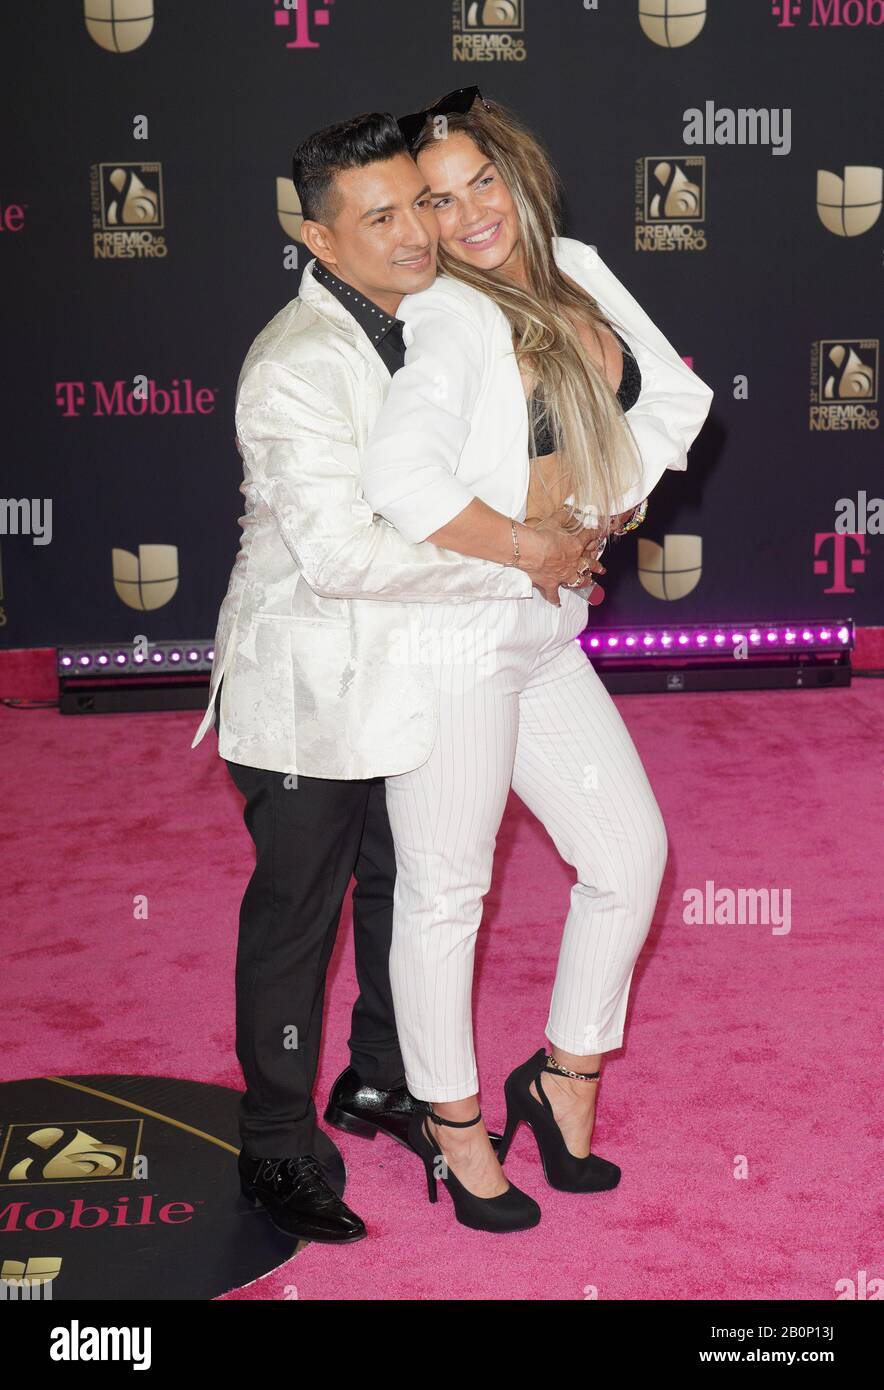 Miami, FL, USA. 20th Feb, 2020. Osmir Garay and Niurka Marcos at Univision's 32nd Annual Premio Lo Nuestro Awards at the AmericanAirlines Arena in Miami, Florida on February 20, 2020. Credit: Aaron Gilbert/Media Punch/Alamy Live News Stock Photo